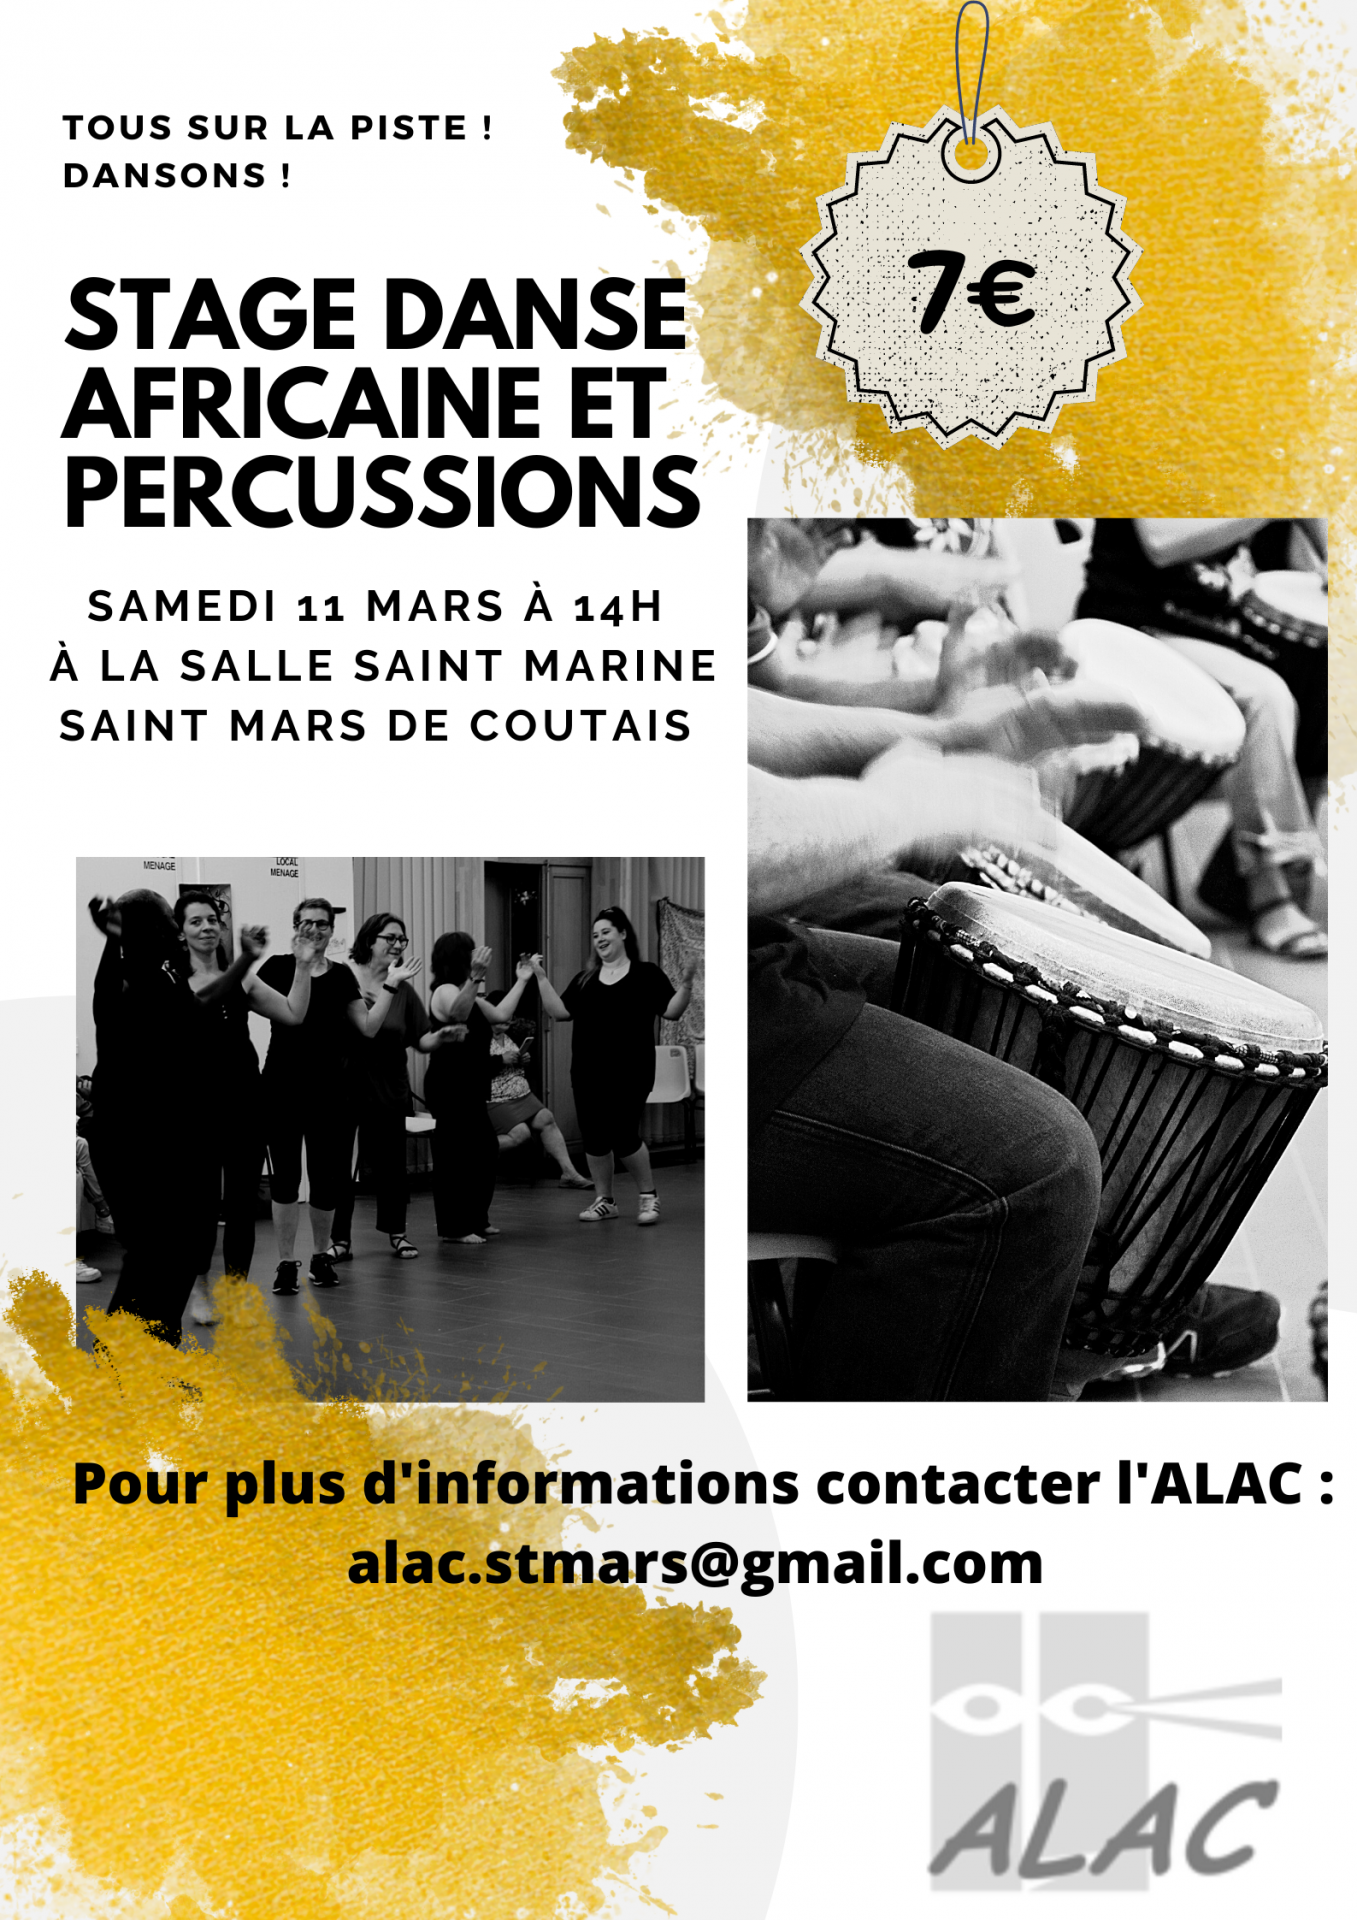 Flyer danse africaine stage